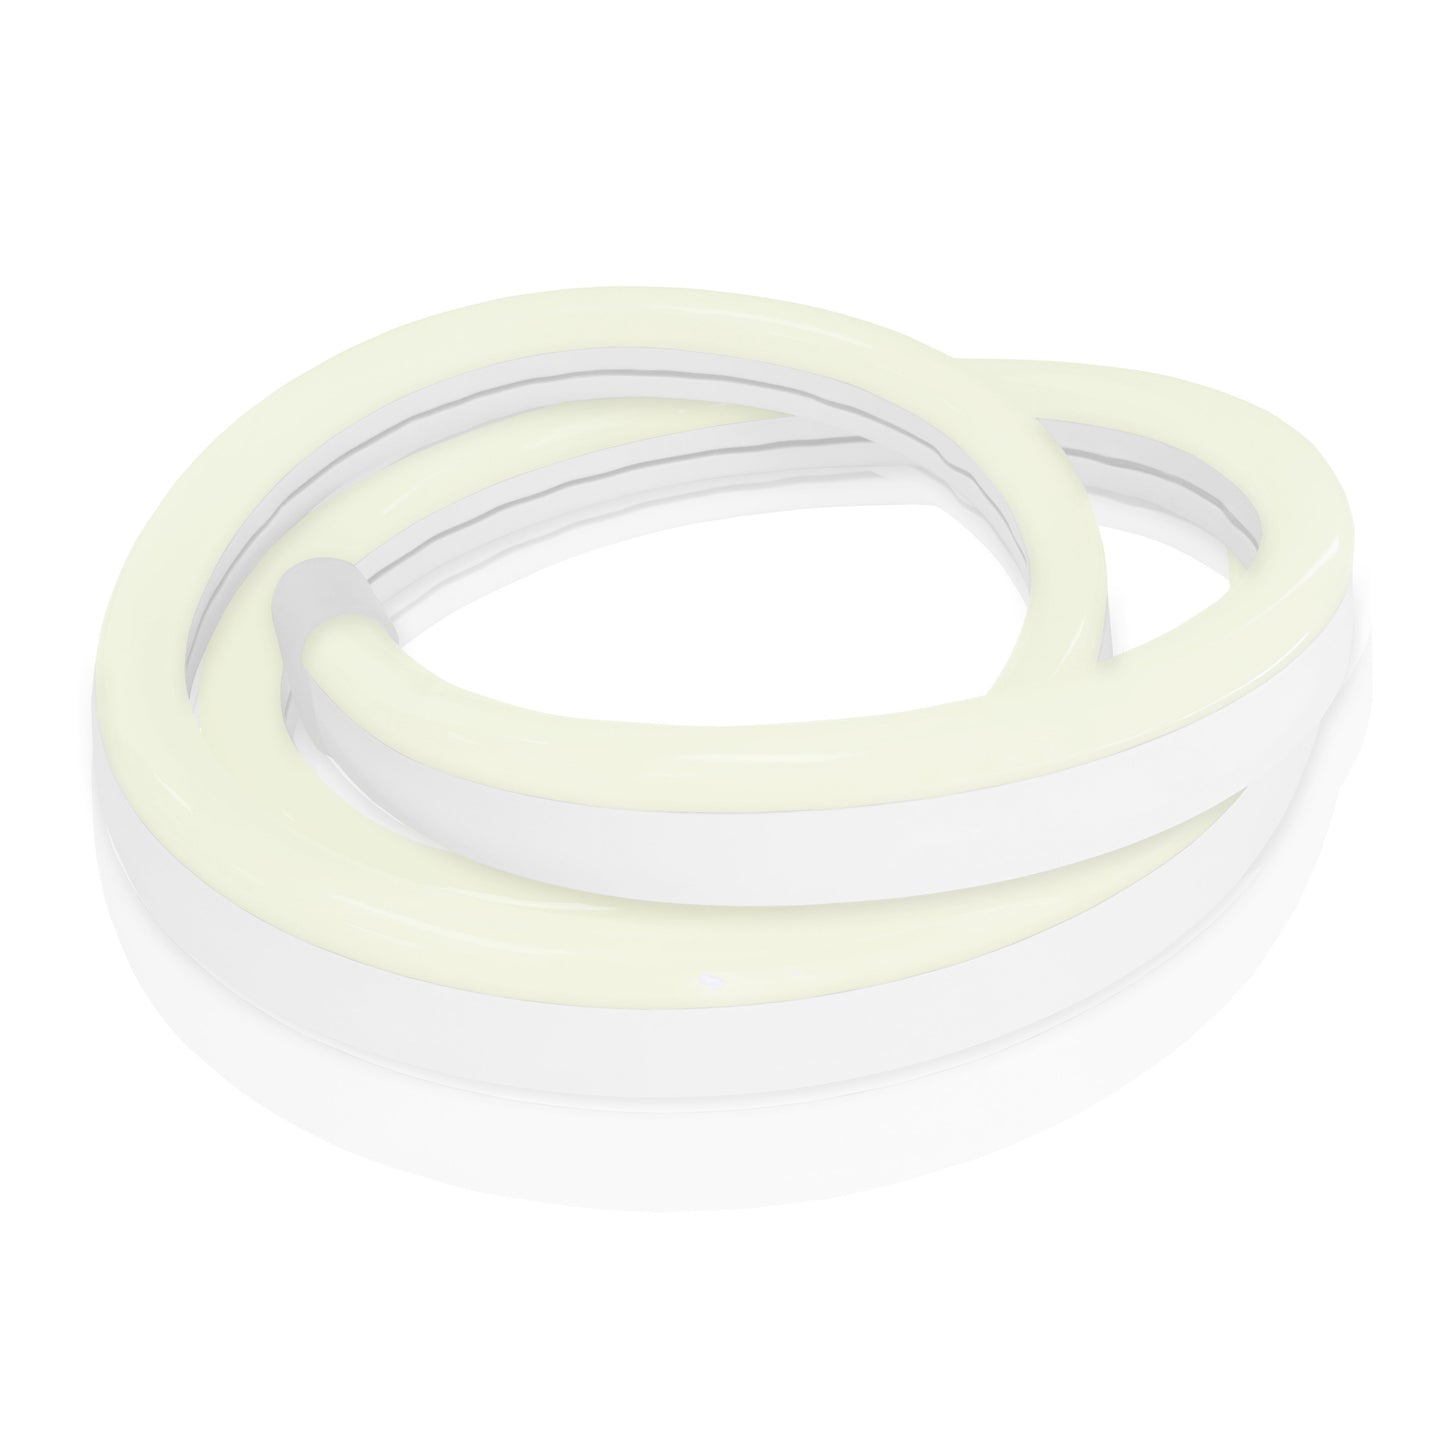 loosely coiled 5500k cool white neon led strip